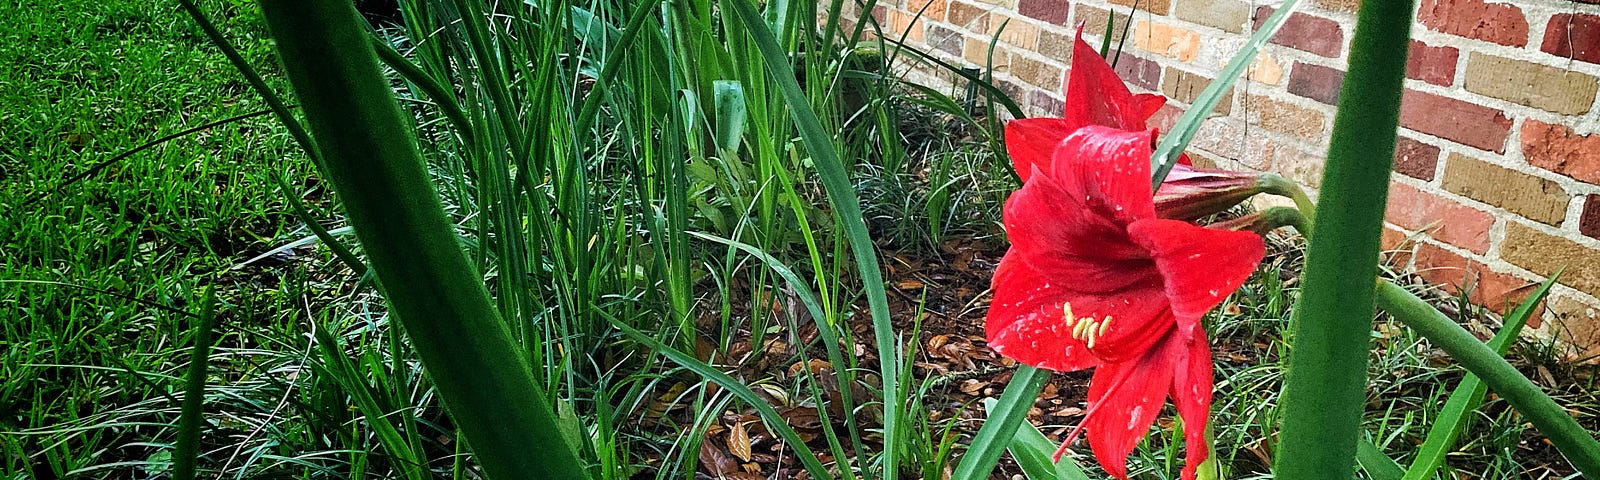 red amaryllis blooming in an unkempt garden among weeds